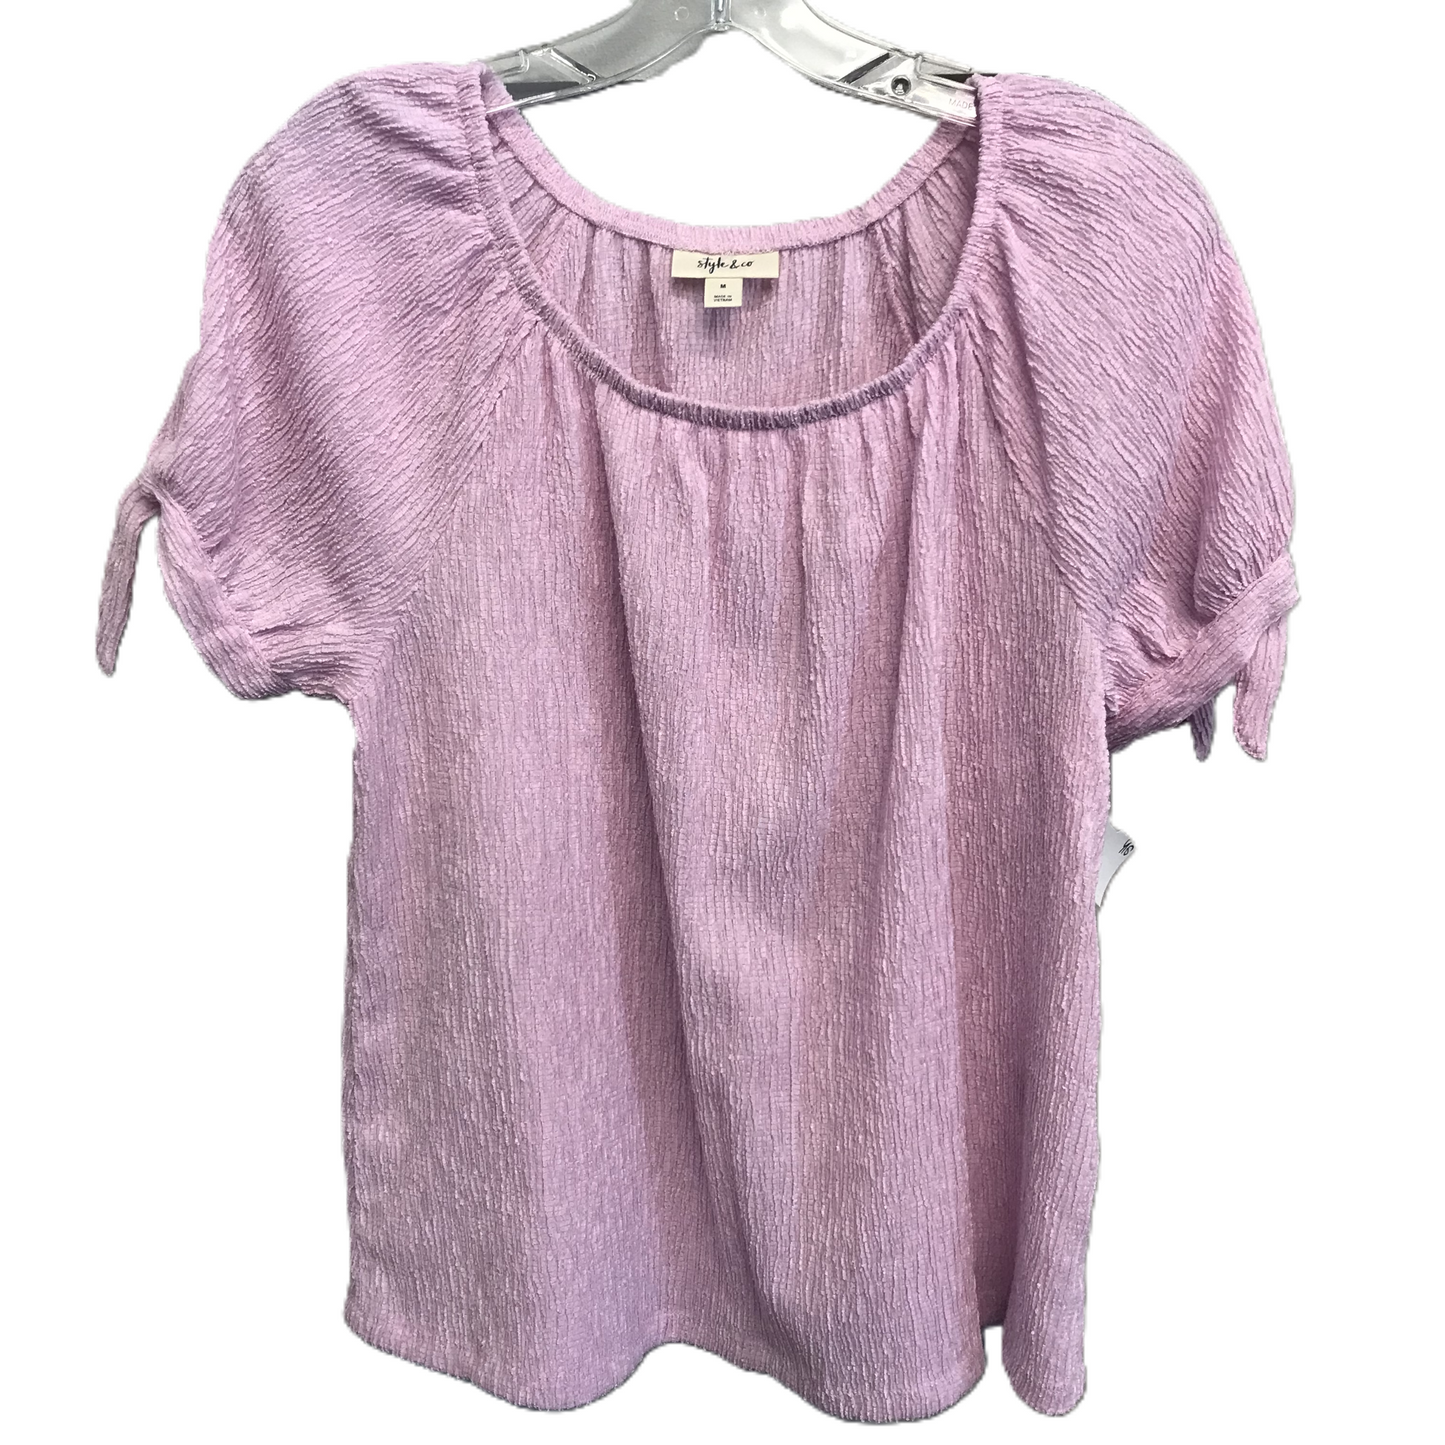 Pink Top Short Sleeve By Style And Company, Size: M